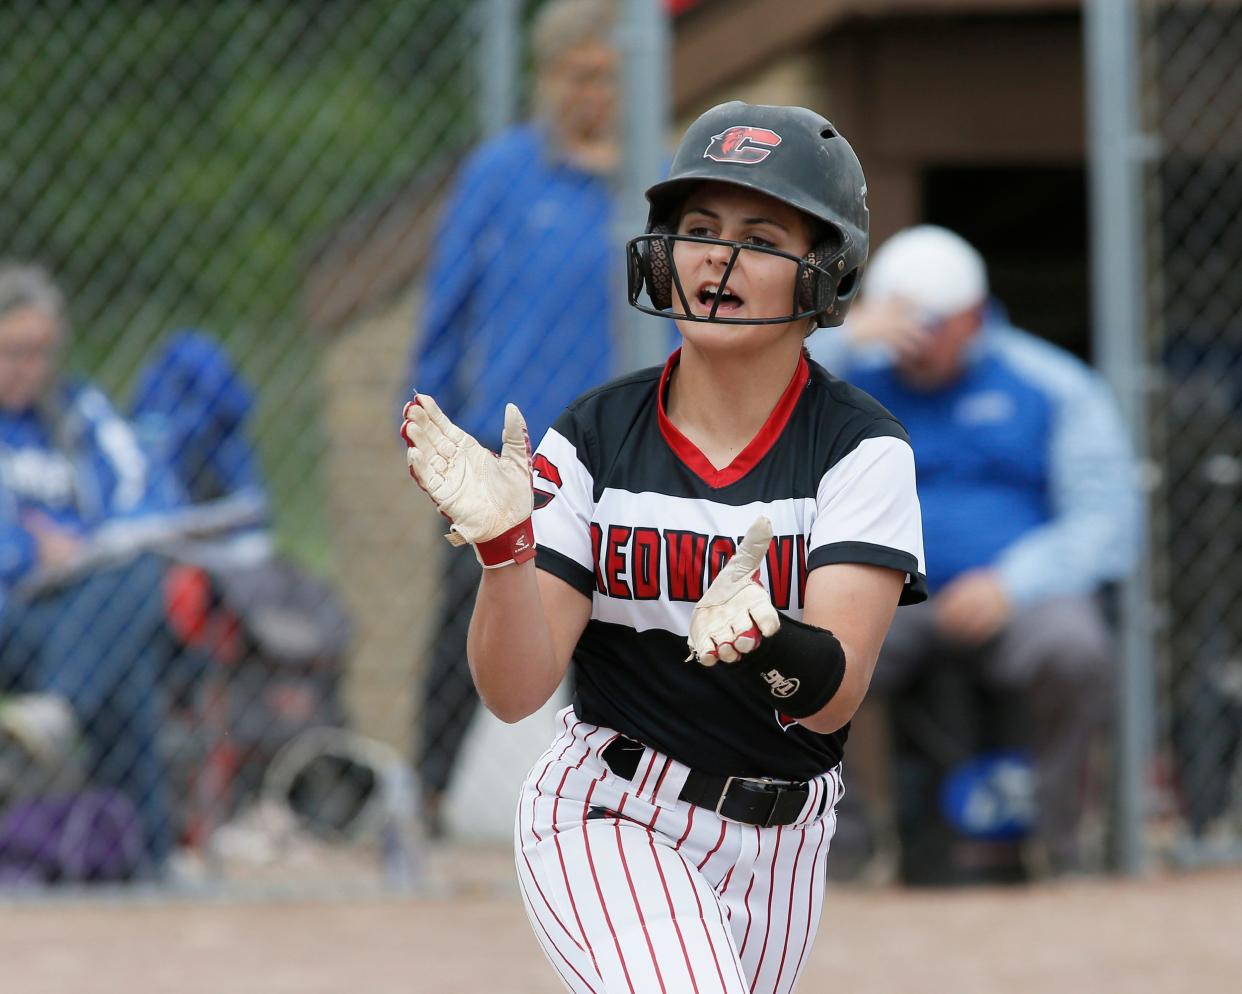 Clinton's Raven Aldridge claps her hands toward the Redwolves dugout as she heads to first base after drawing a walk in Monday's doubleheader against Dundee.